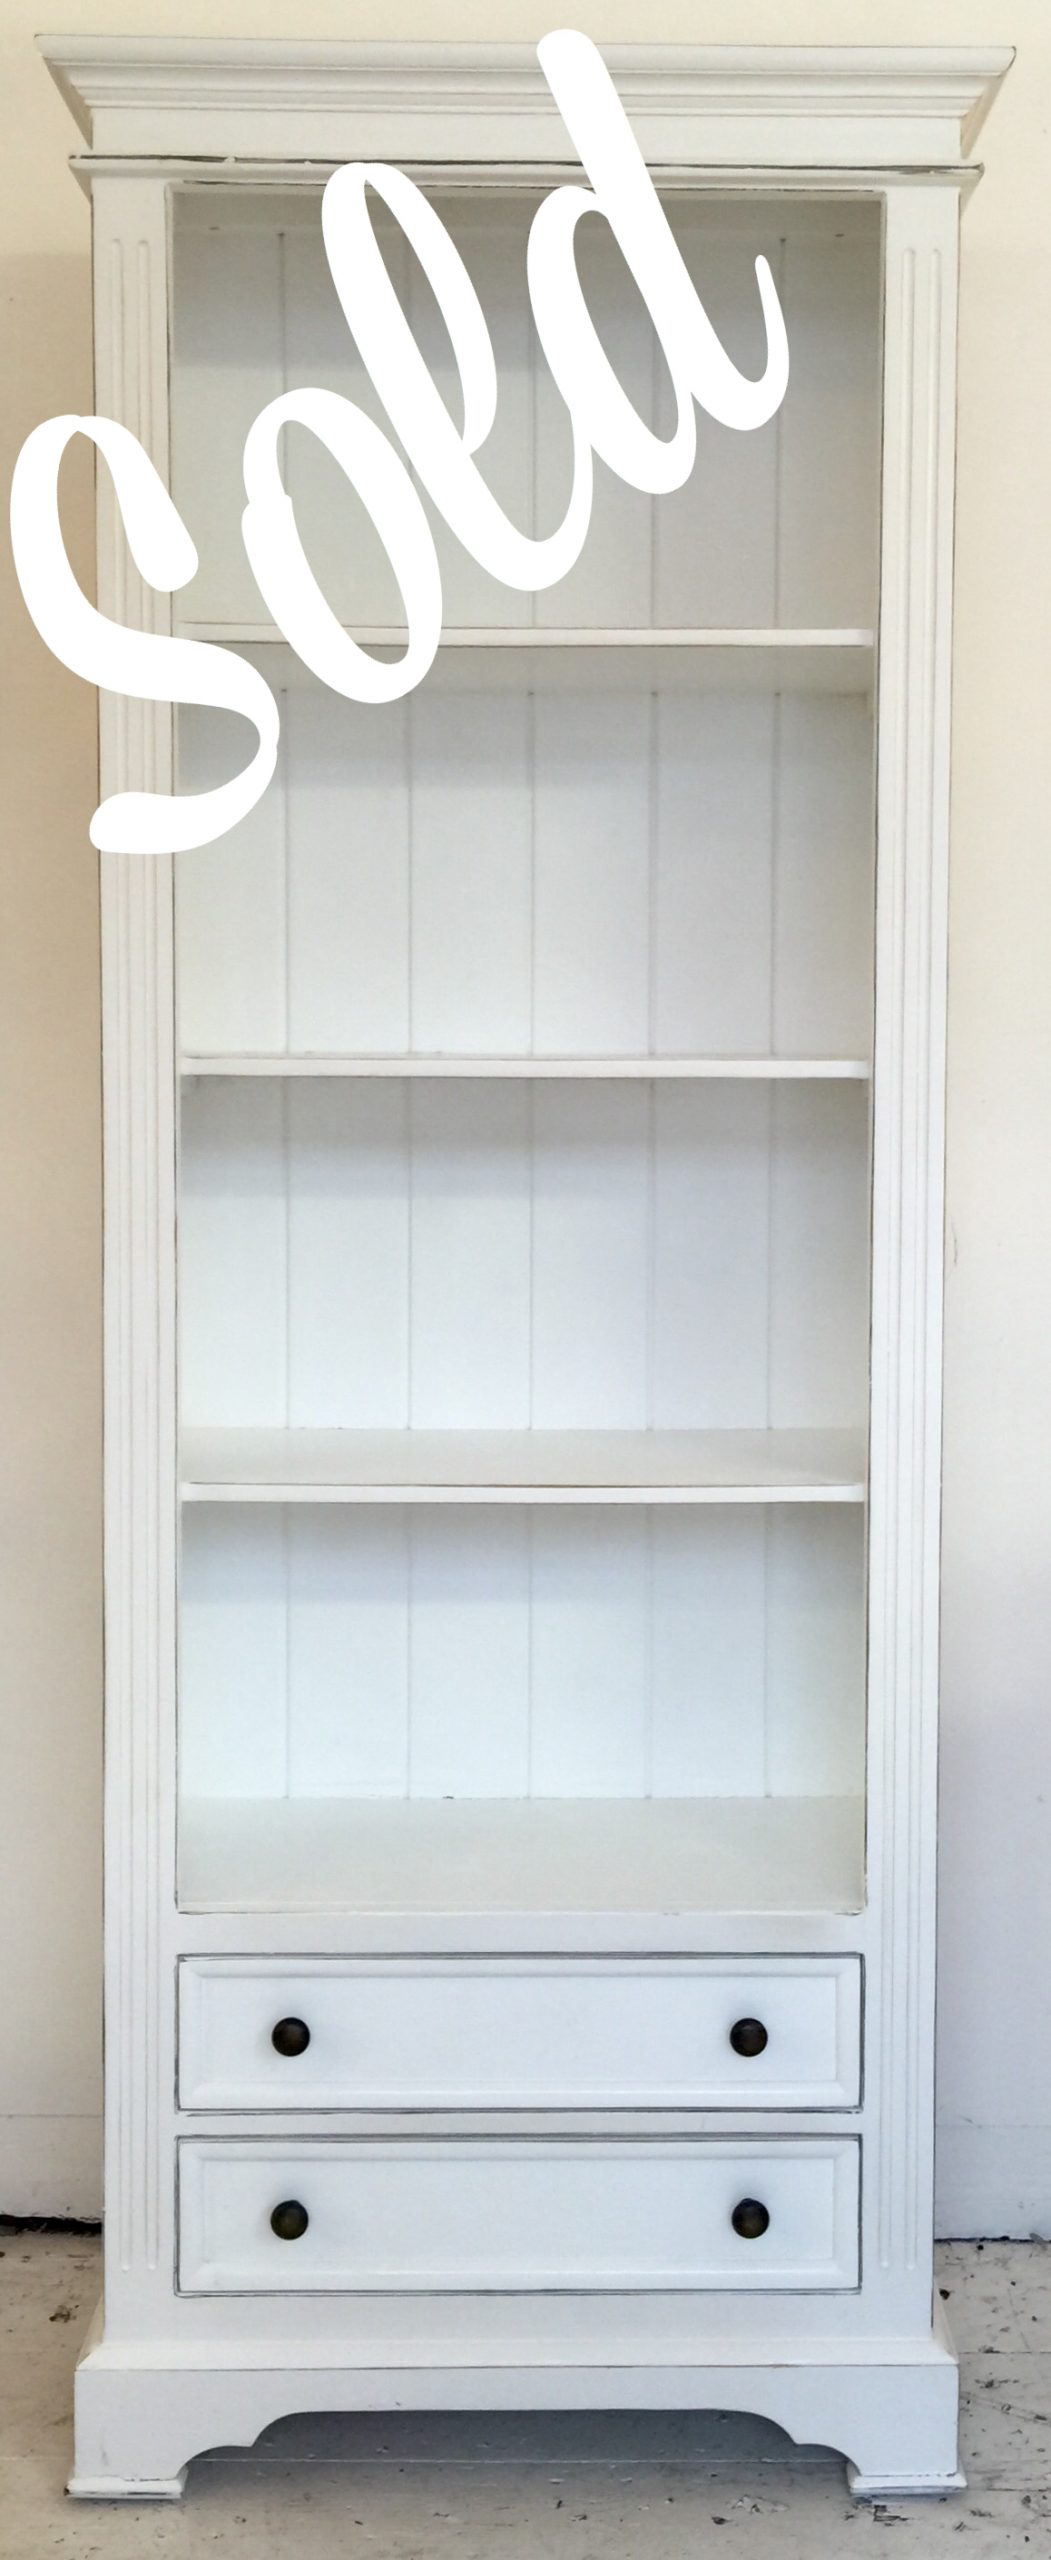 Tall White Bookcase With Drawers • Deck Storage Box Ideas